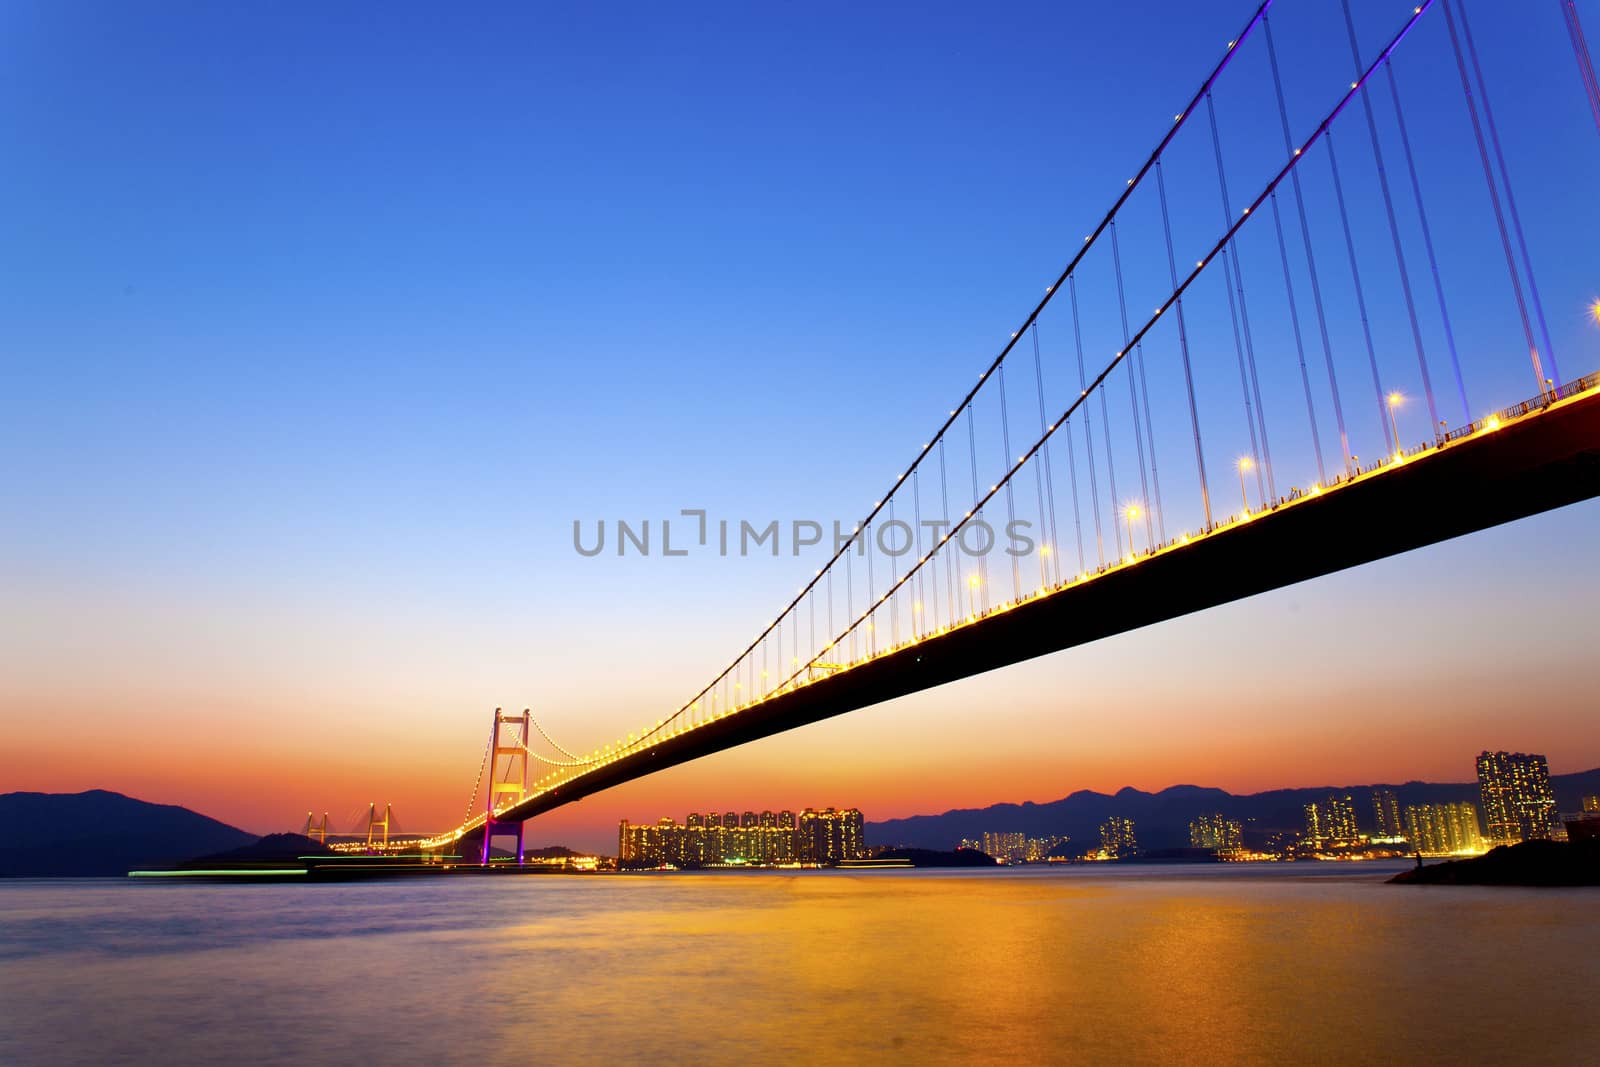 Modern bridge connecting the city at sunset by kawing921